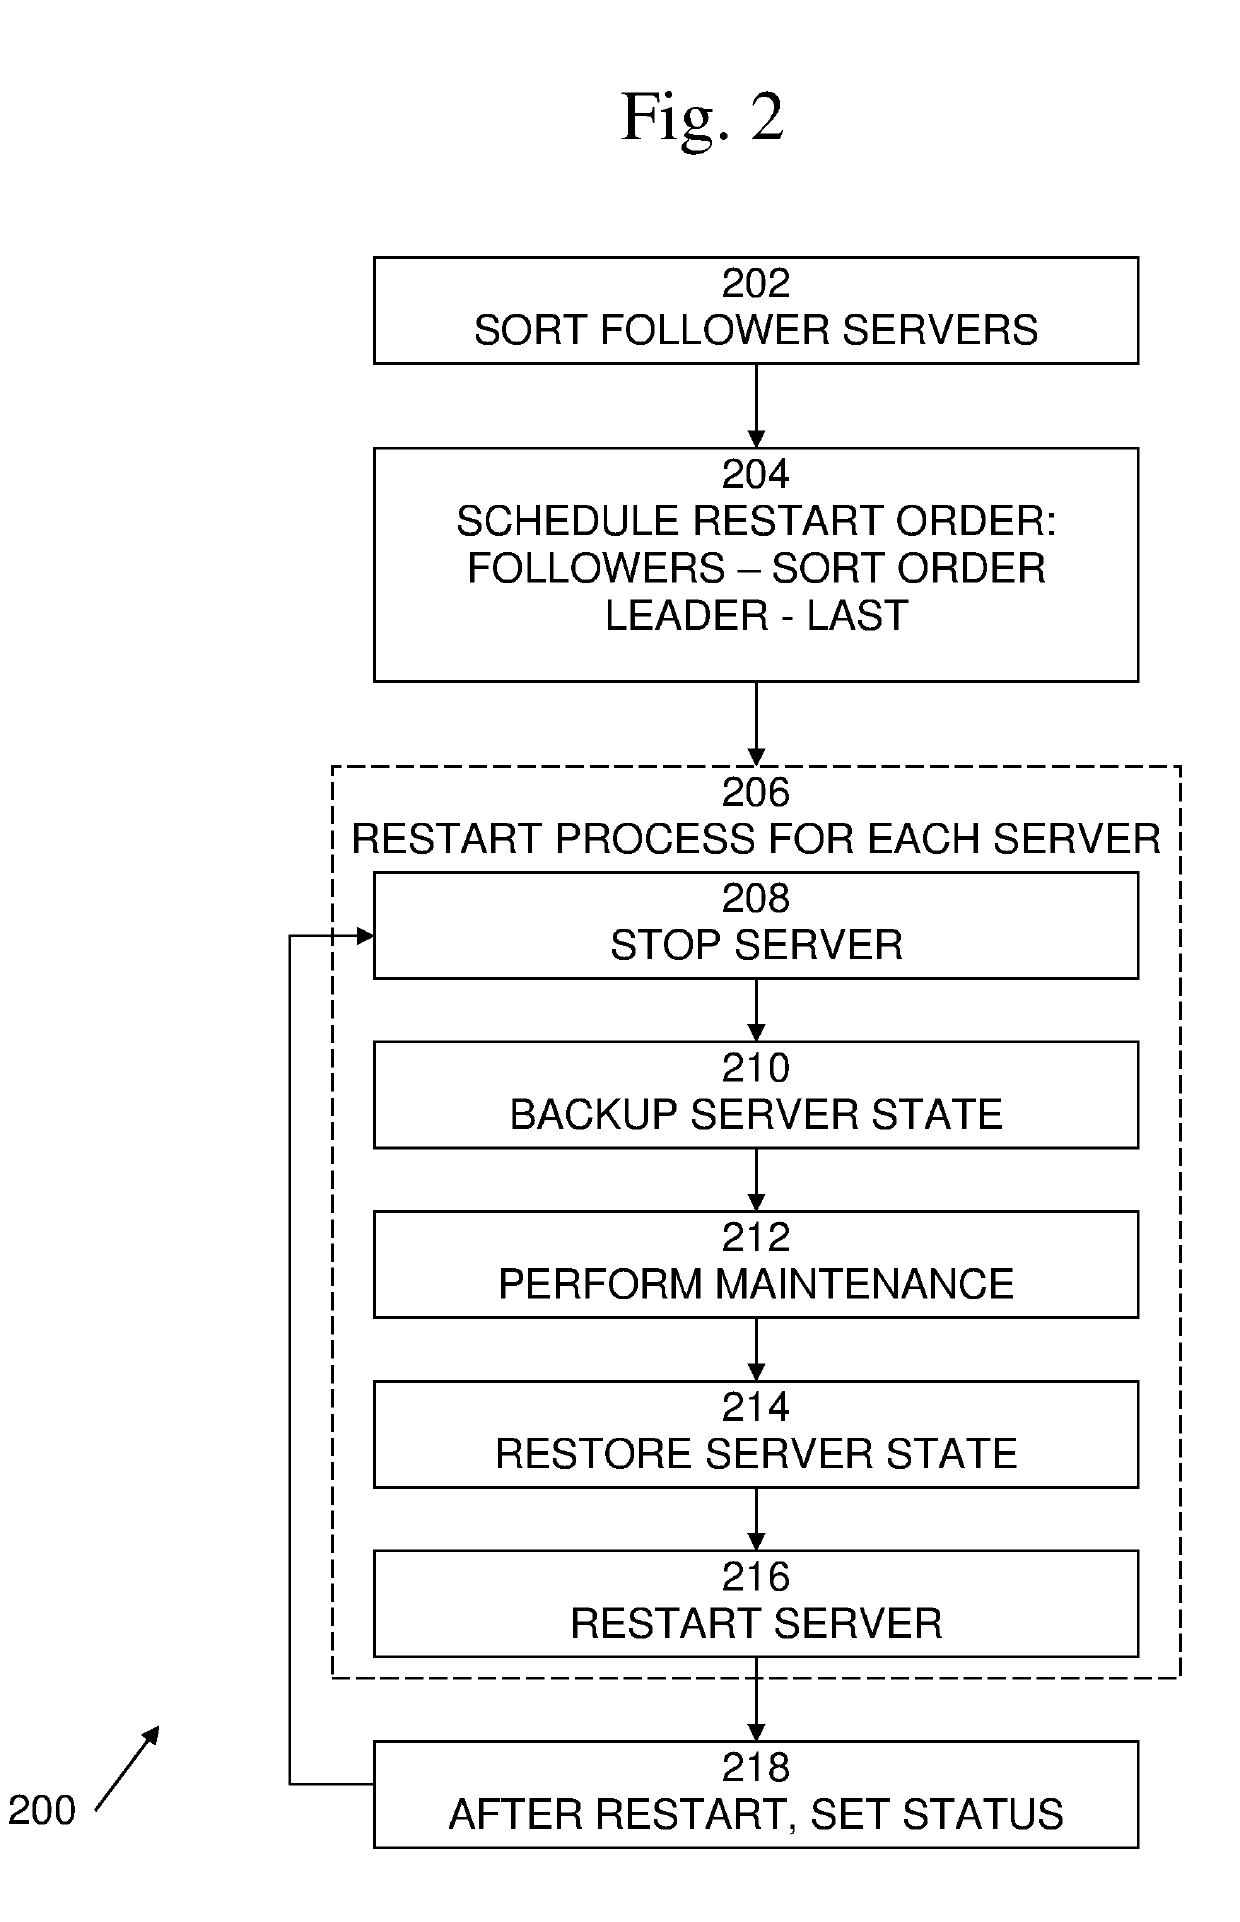 Optimized rolling restart of stateful services to minimize disruption